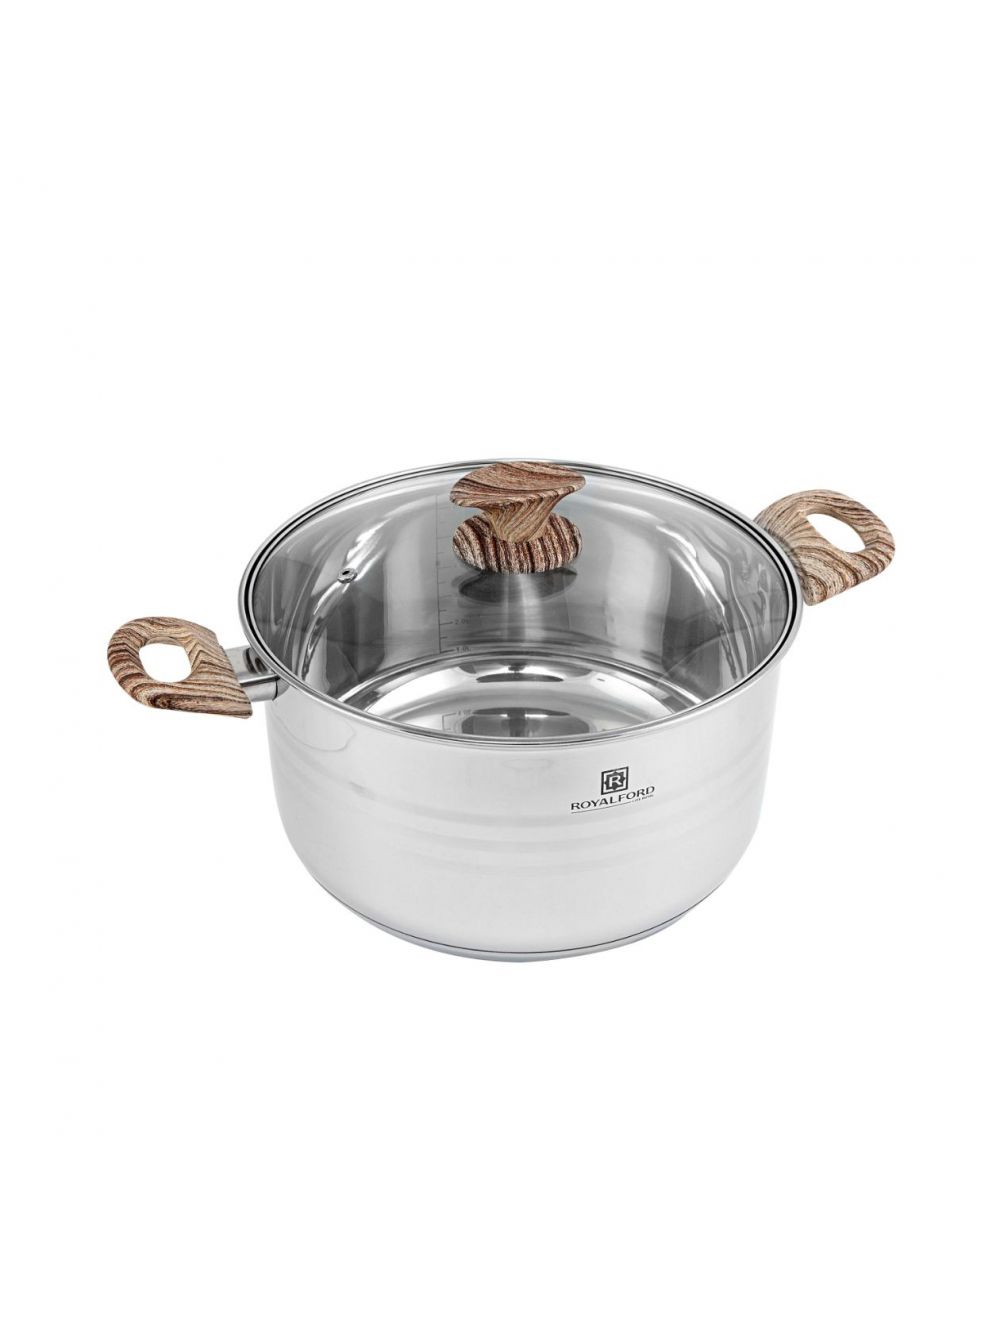 Royalford RF8550 28cm Stainless Steel Casserole with Glass Lid